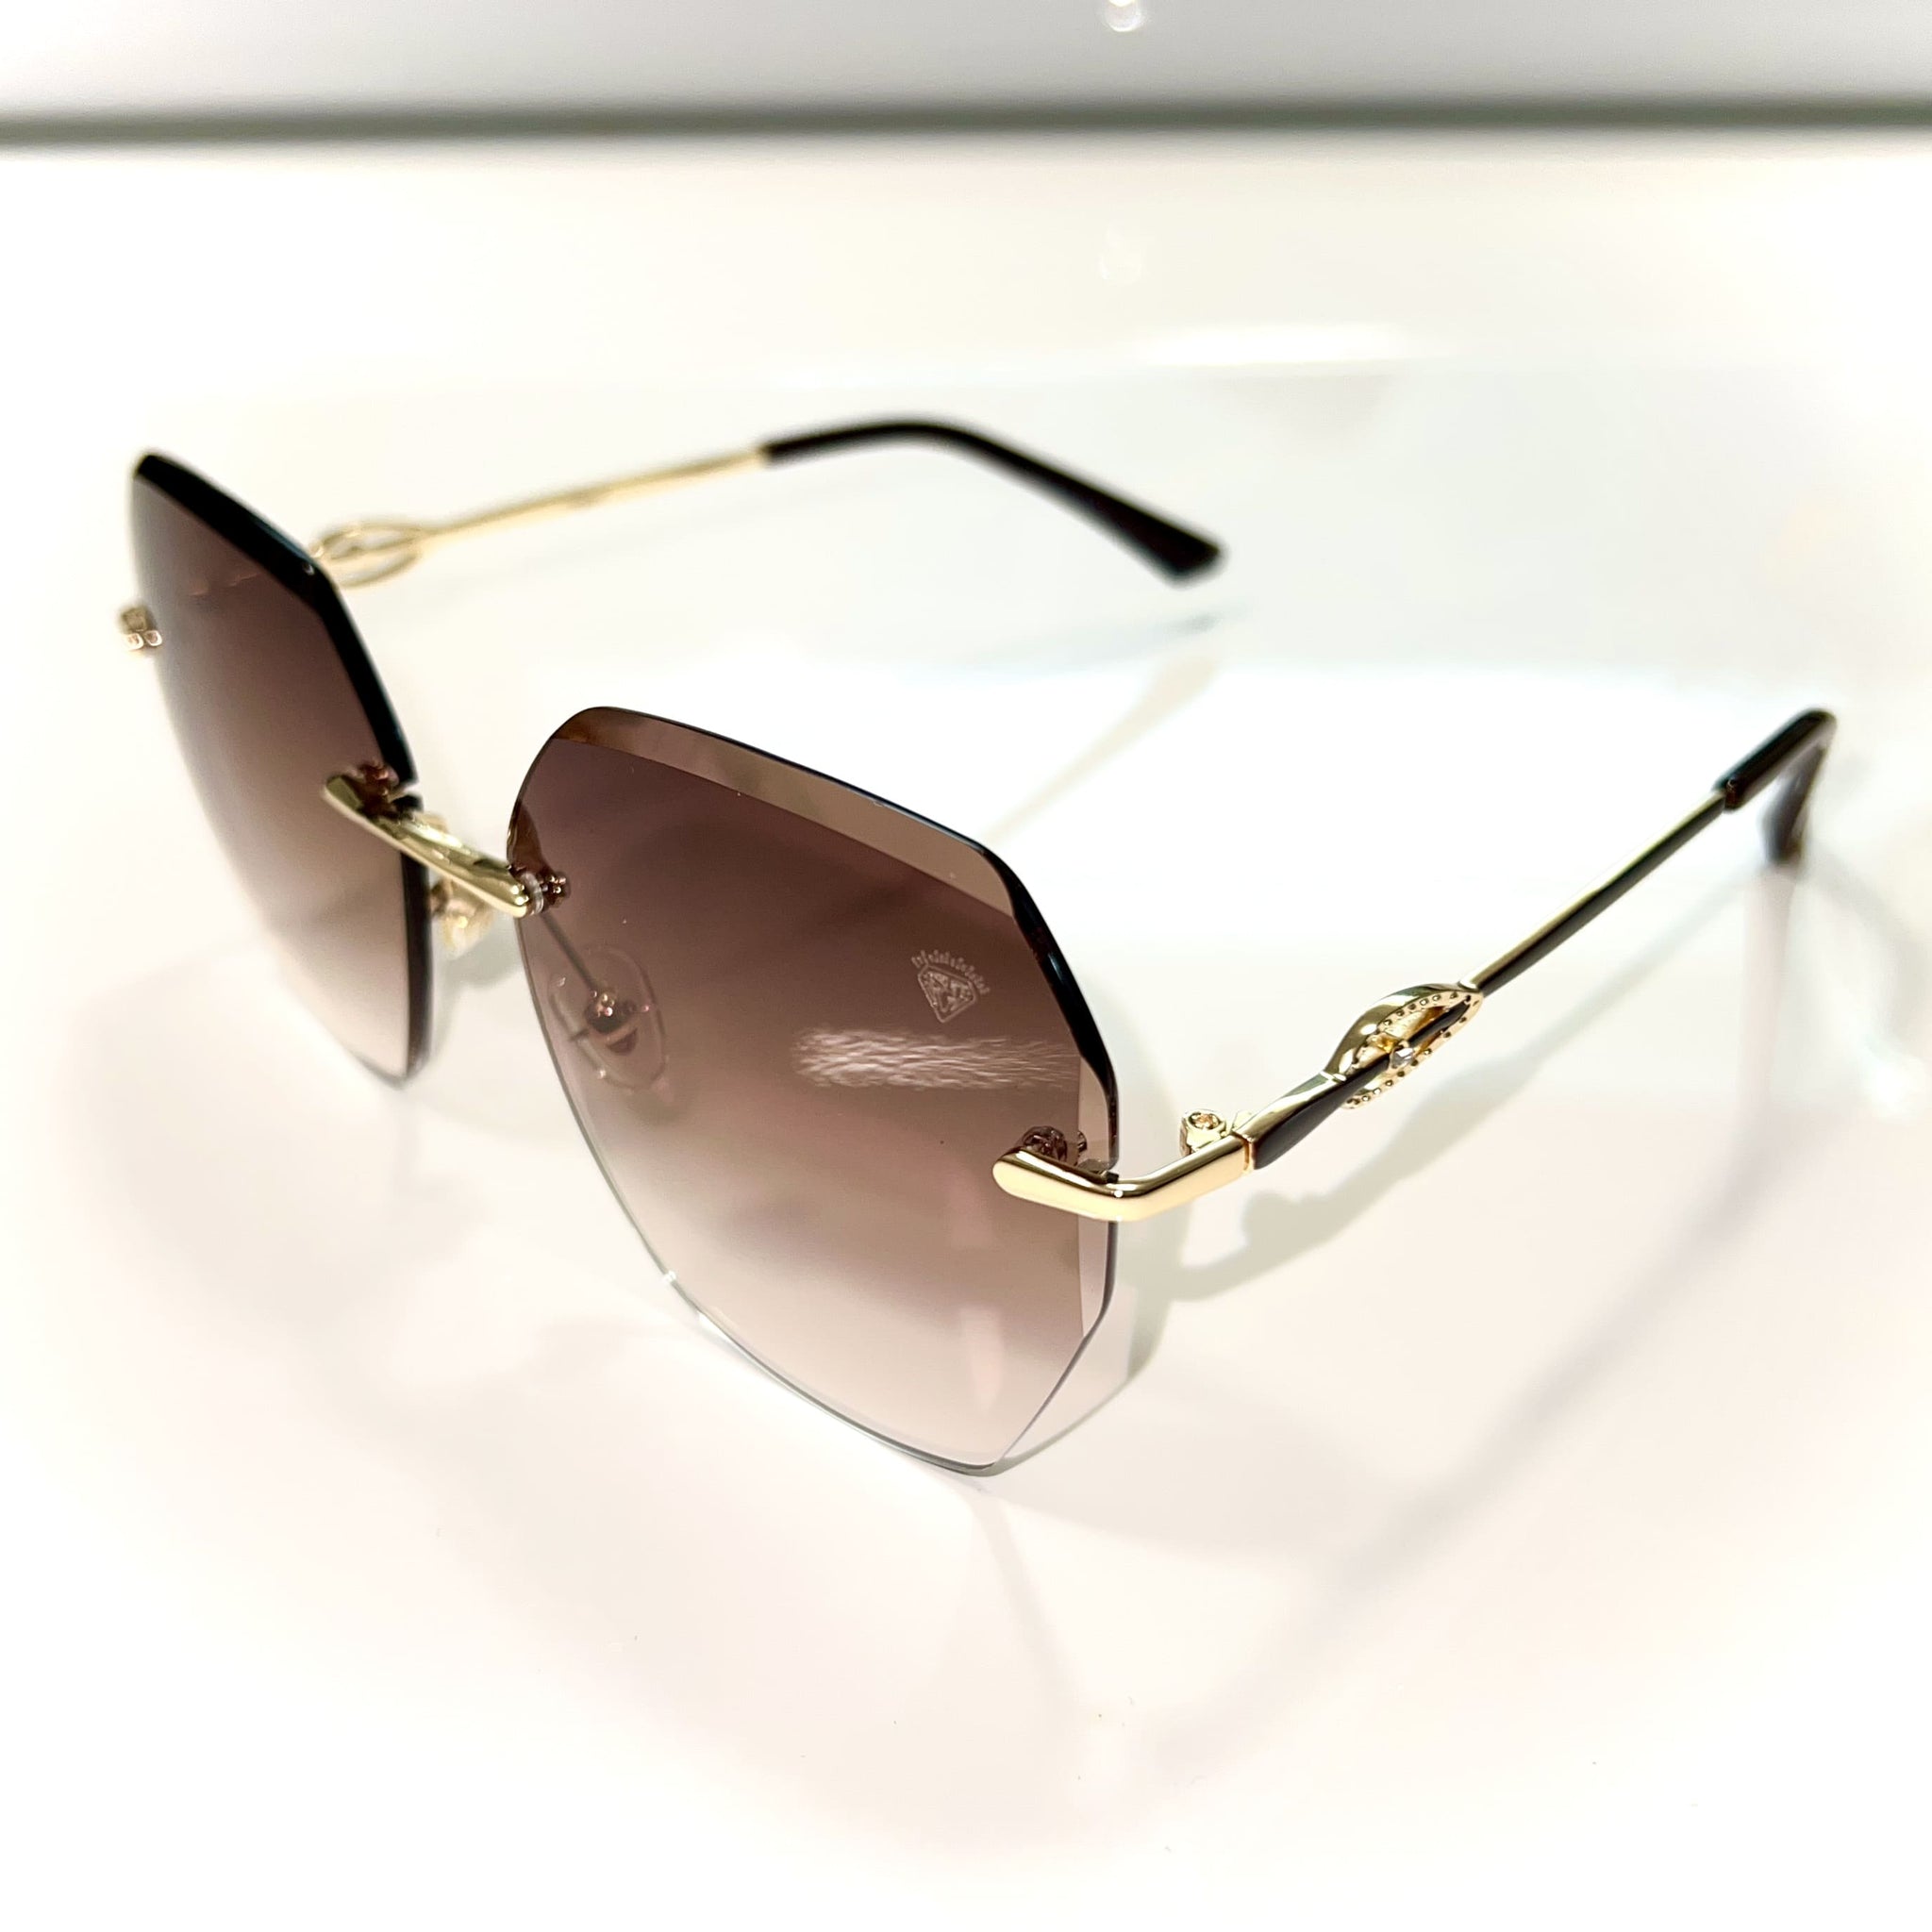 Egyptian Eye Glasses - "For Her" - 14 carat gold plated - Brown Shade- Sehgal Glasses